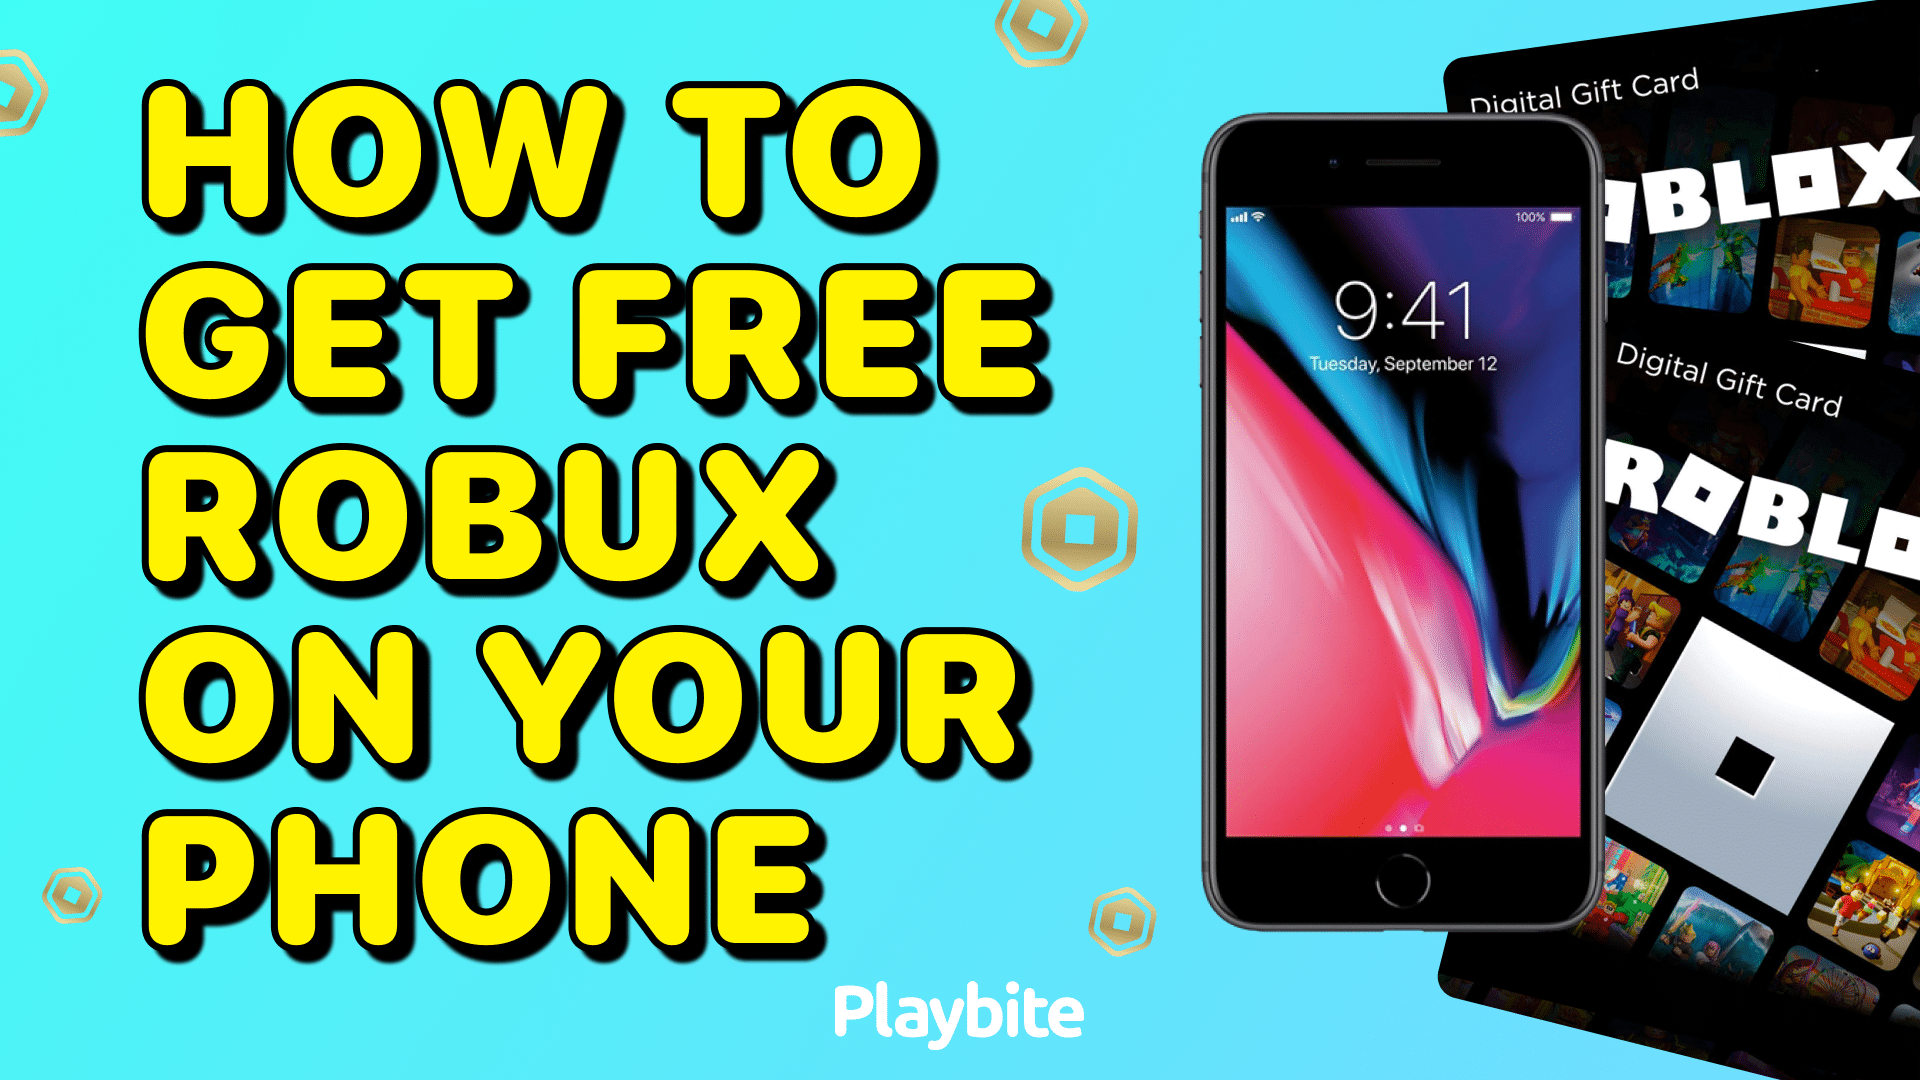 How To Get Free Robux On Your Phone